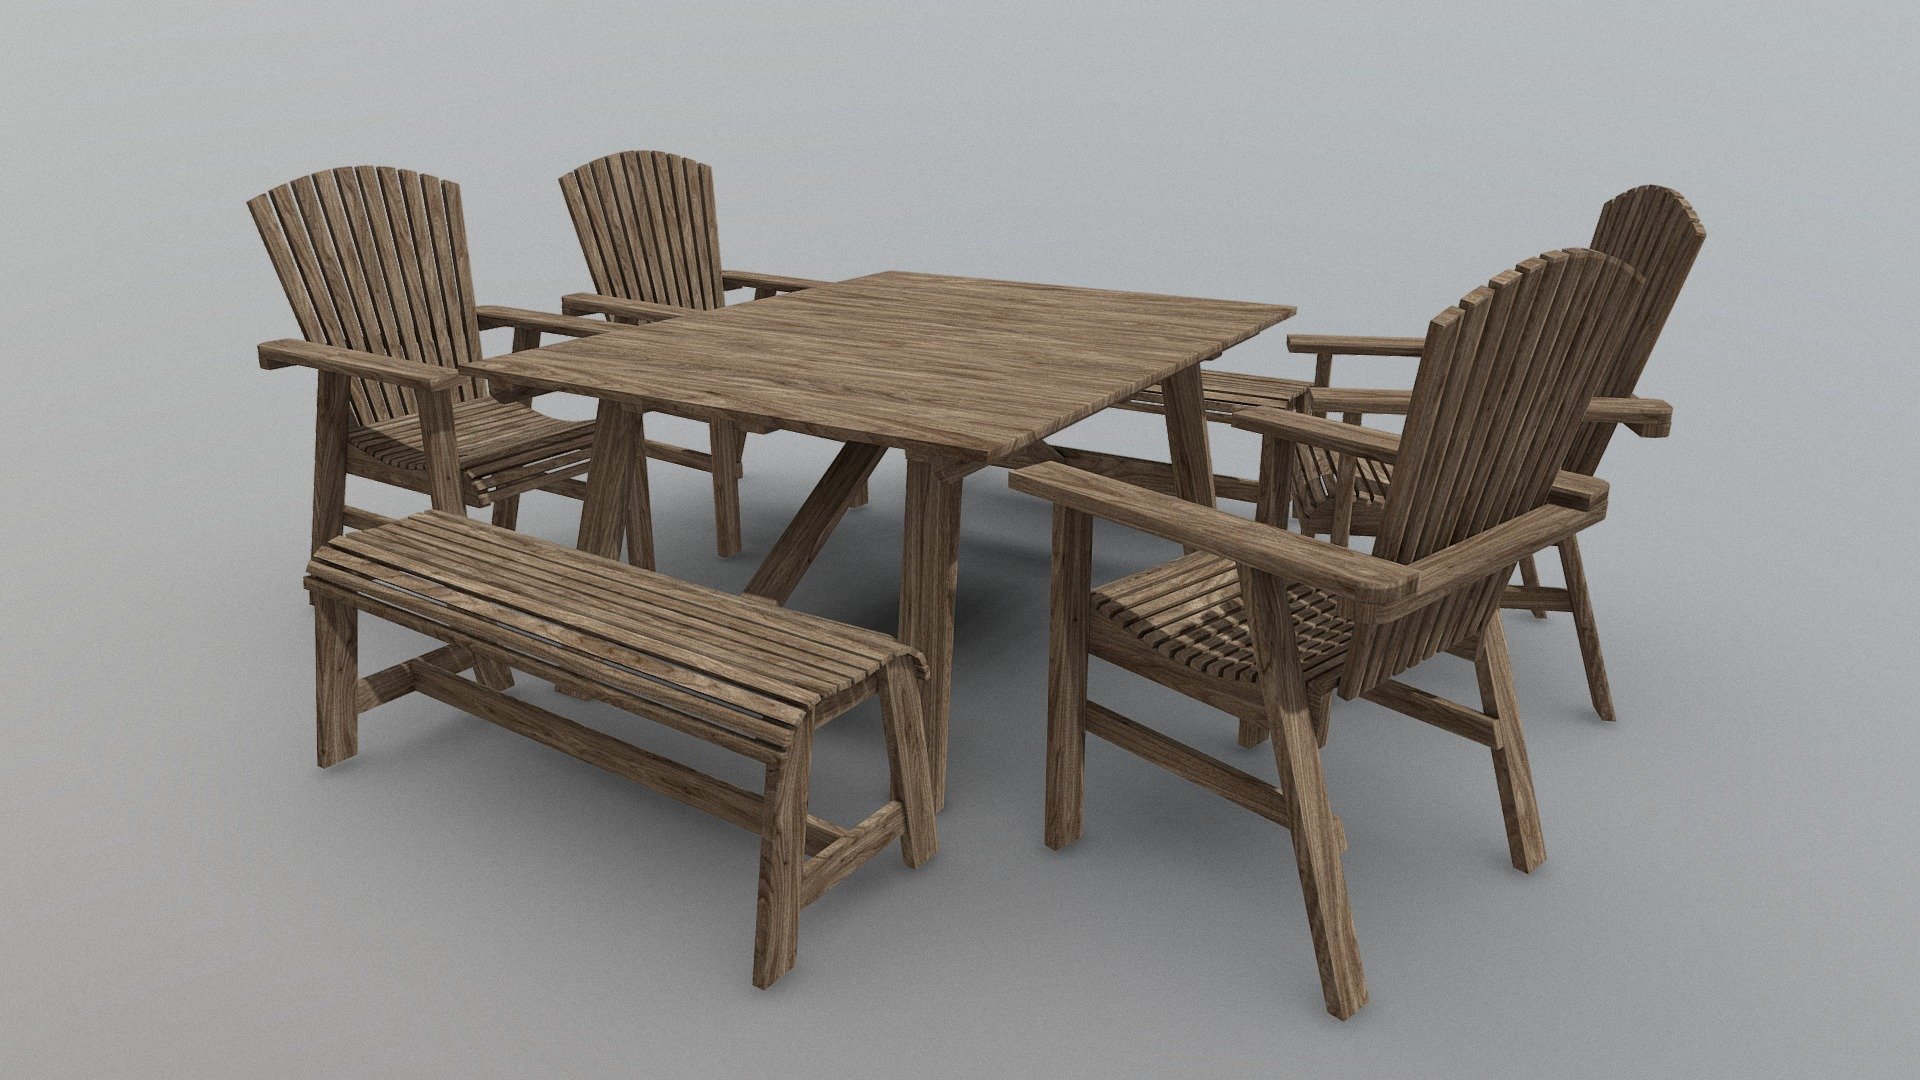 Rustic Wooden Table Set (Low Poly)